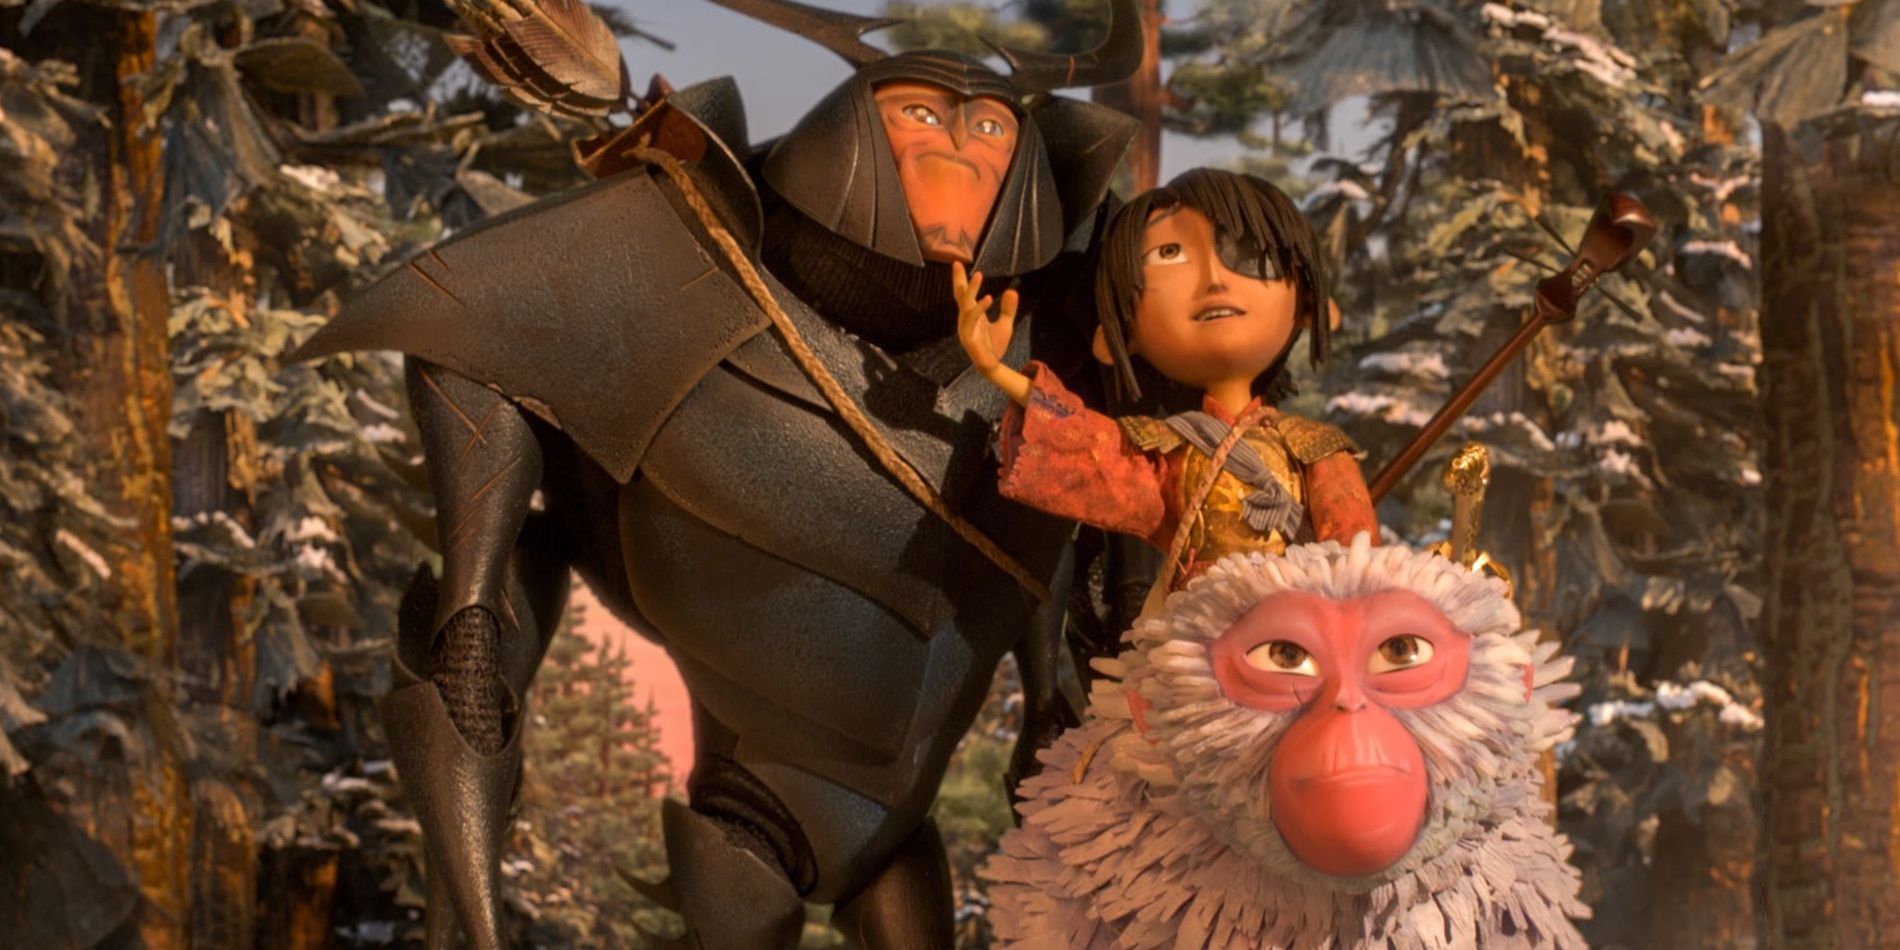 20 Best Animated Movies (NOT Made By Disney Or Pixar)